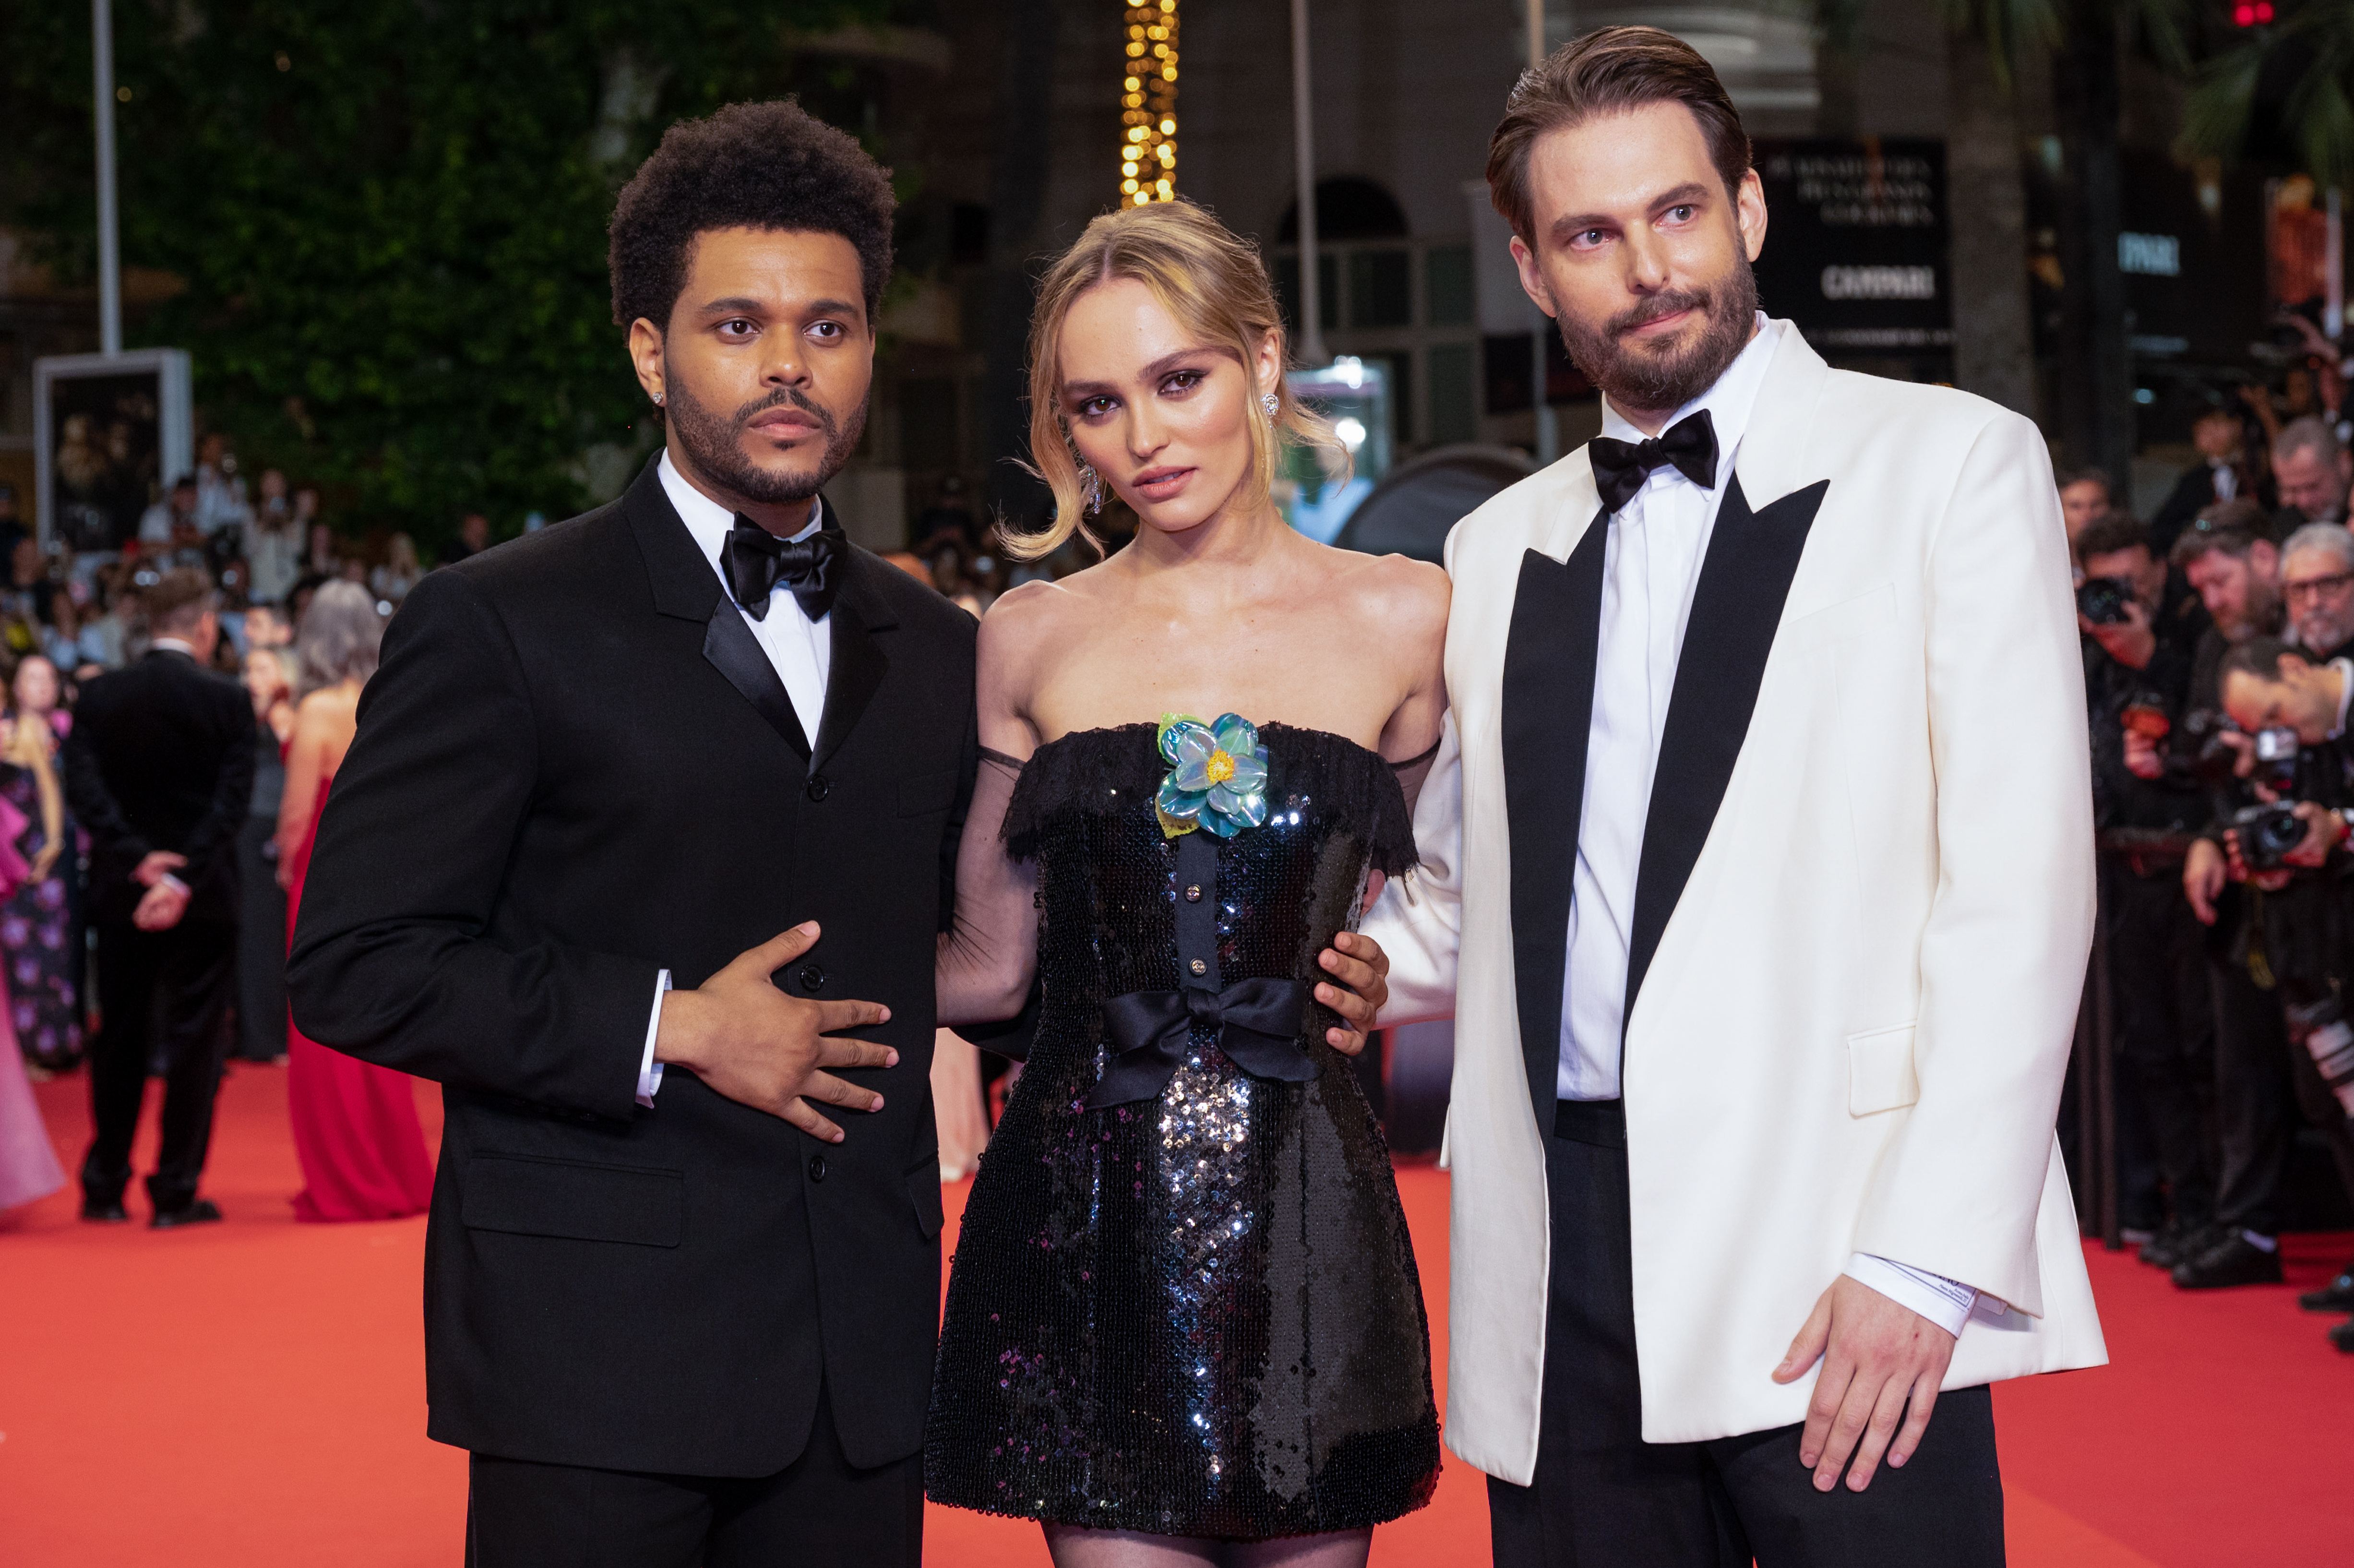 Lily-Rose Depp, Abel “The Weeknd” Tesfaye, and Sam Levinson at the "The Idol" red carpet in Cannes, France on May 22, 2023 | Source: Getty Images